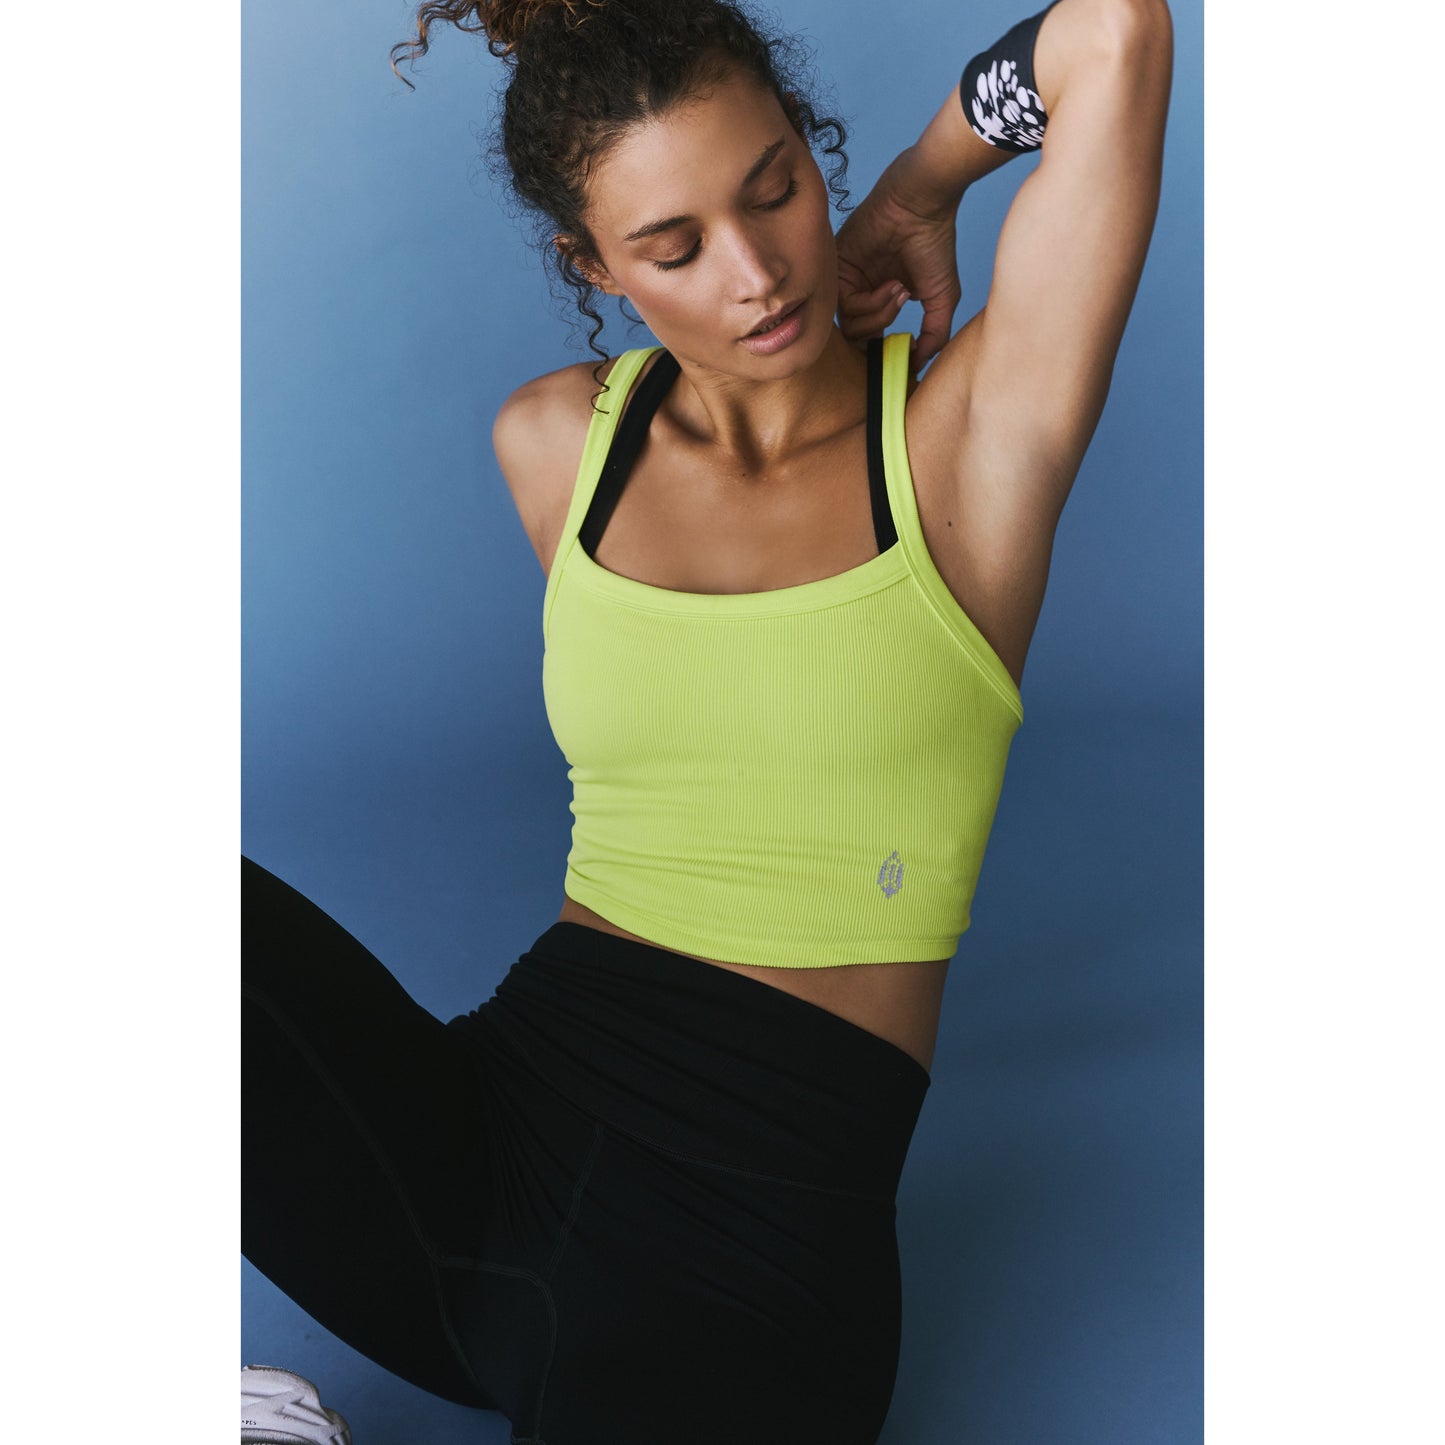 A woman in a Free People Movement All Clear Cami Solid in Highlighter Yellow and black leggings stretching her arm behind her head against a blue background.